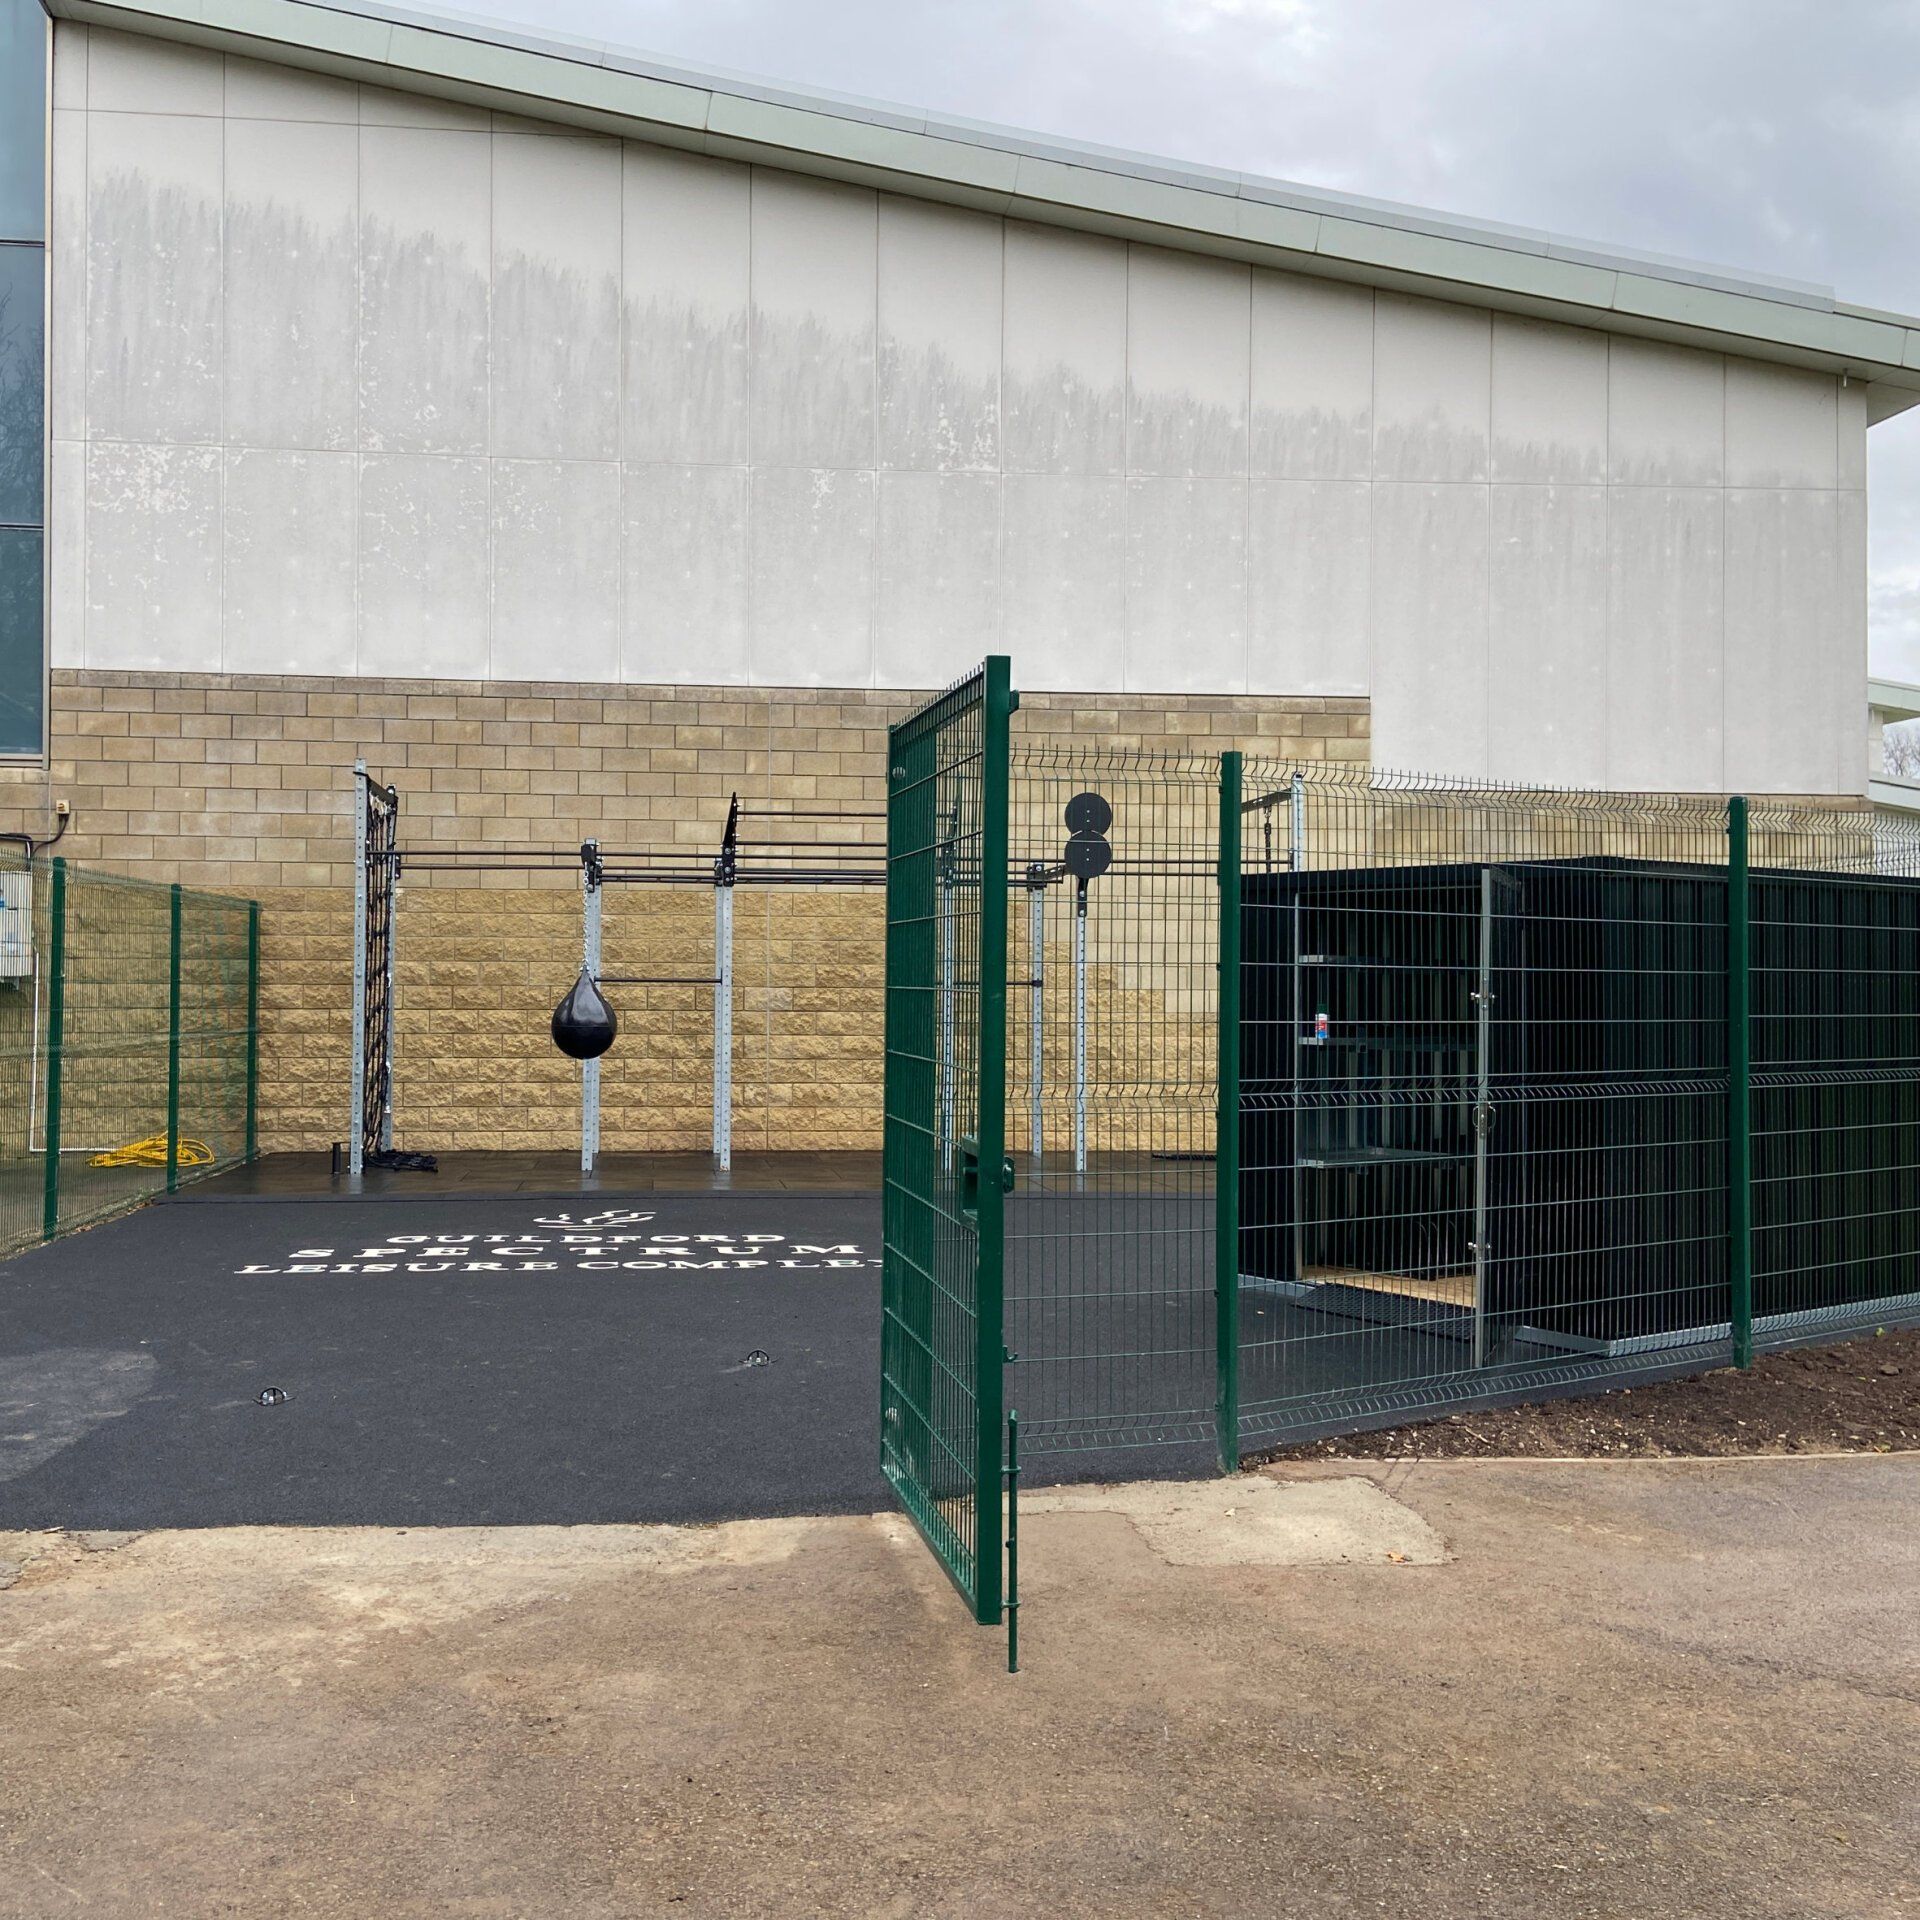 Completed Area With 3m Storage Unit - Guildford Spectrum Outdoor Fitness Area